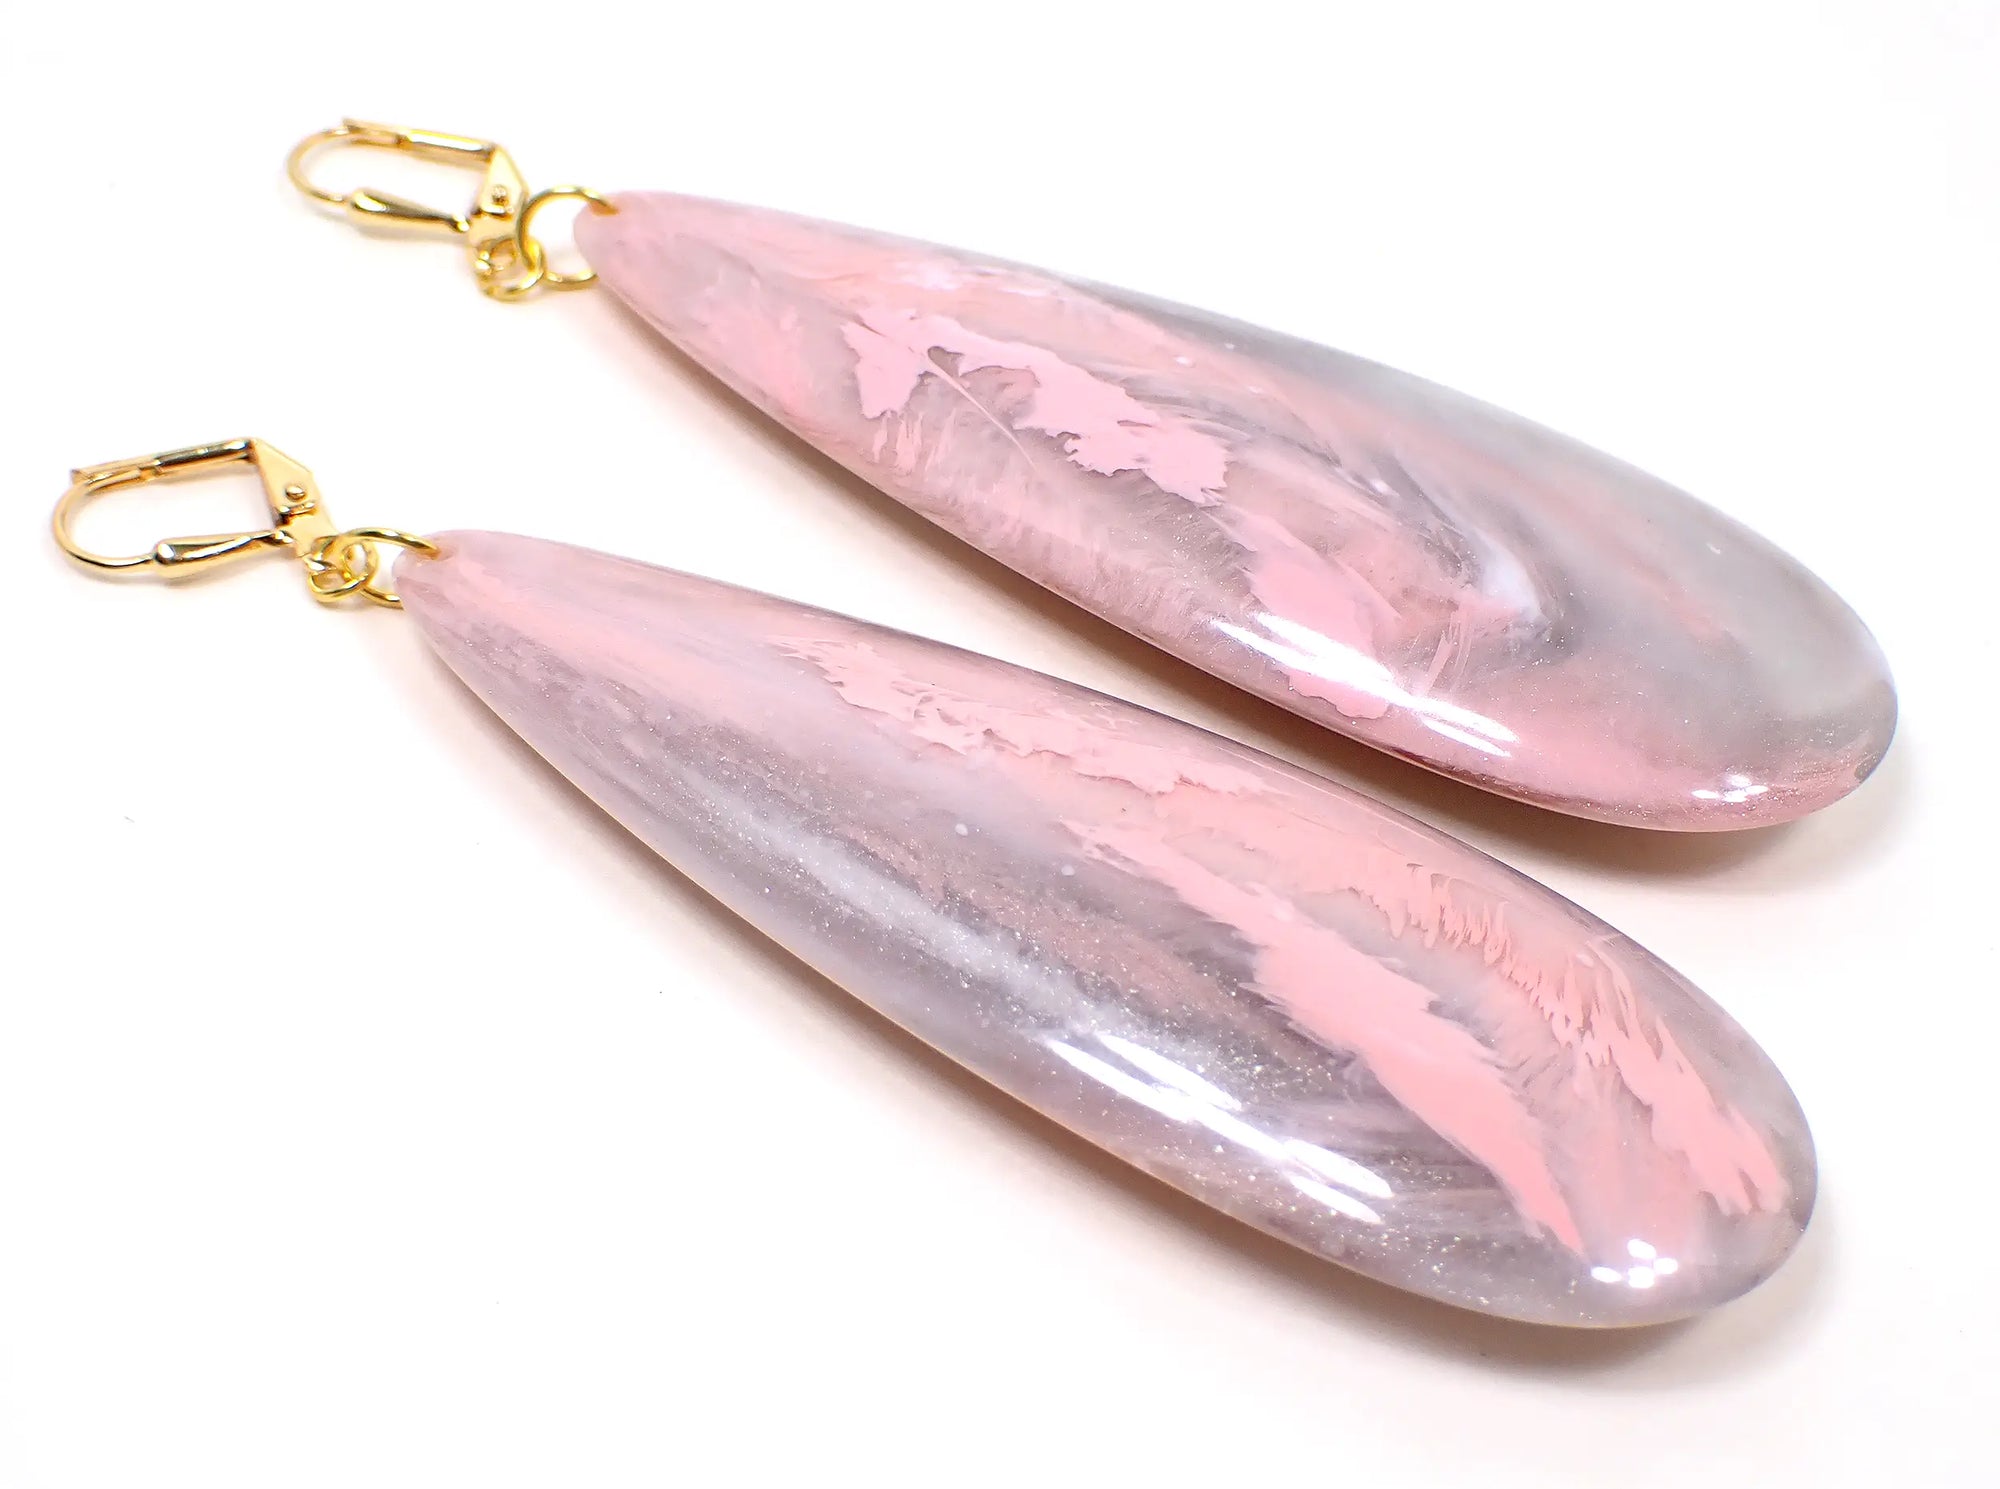 Angled view of the handmade large teardrop earrings. The metal is gold plated in color. There are very large long acrylic teardrops that have marbled pink and gray colors.